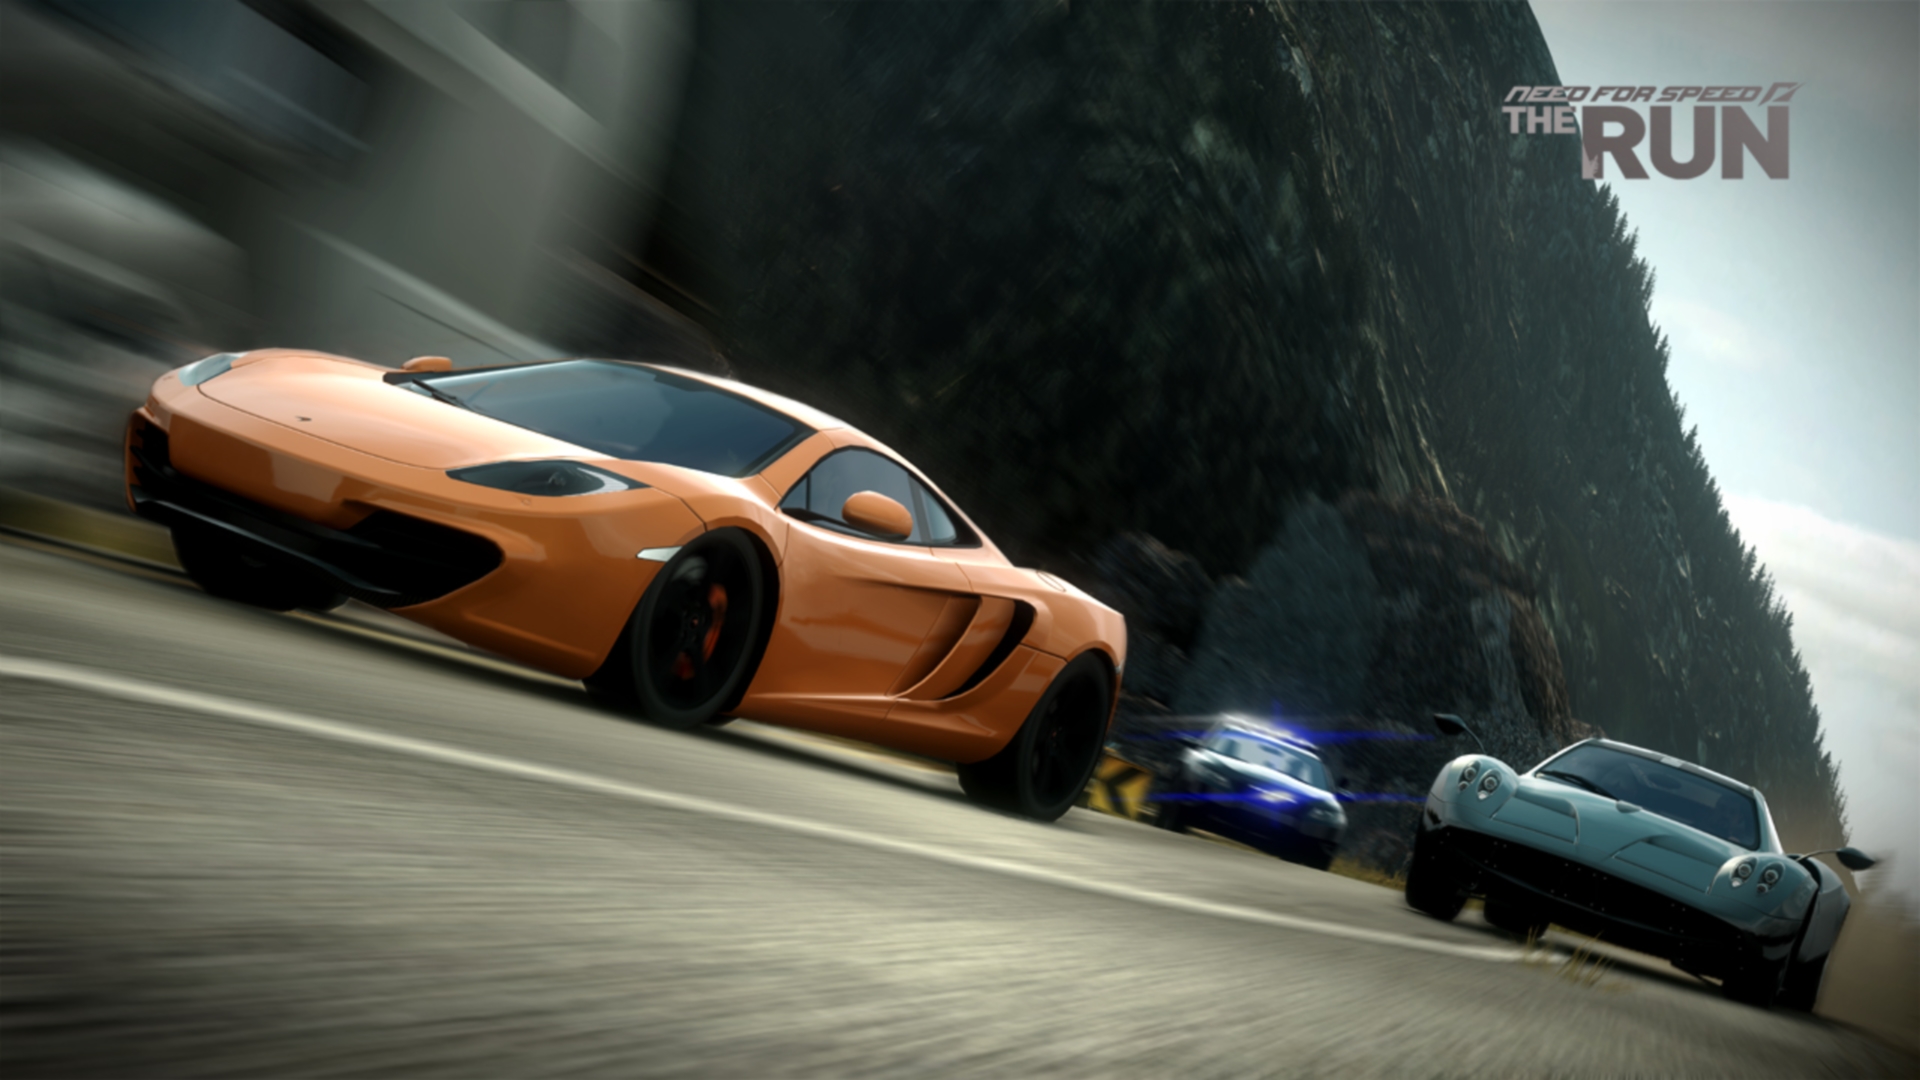 NFS The Run HD Wallpapers I Have A PC